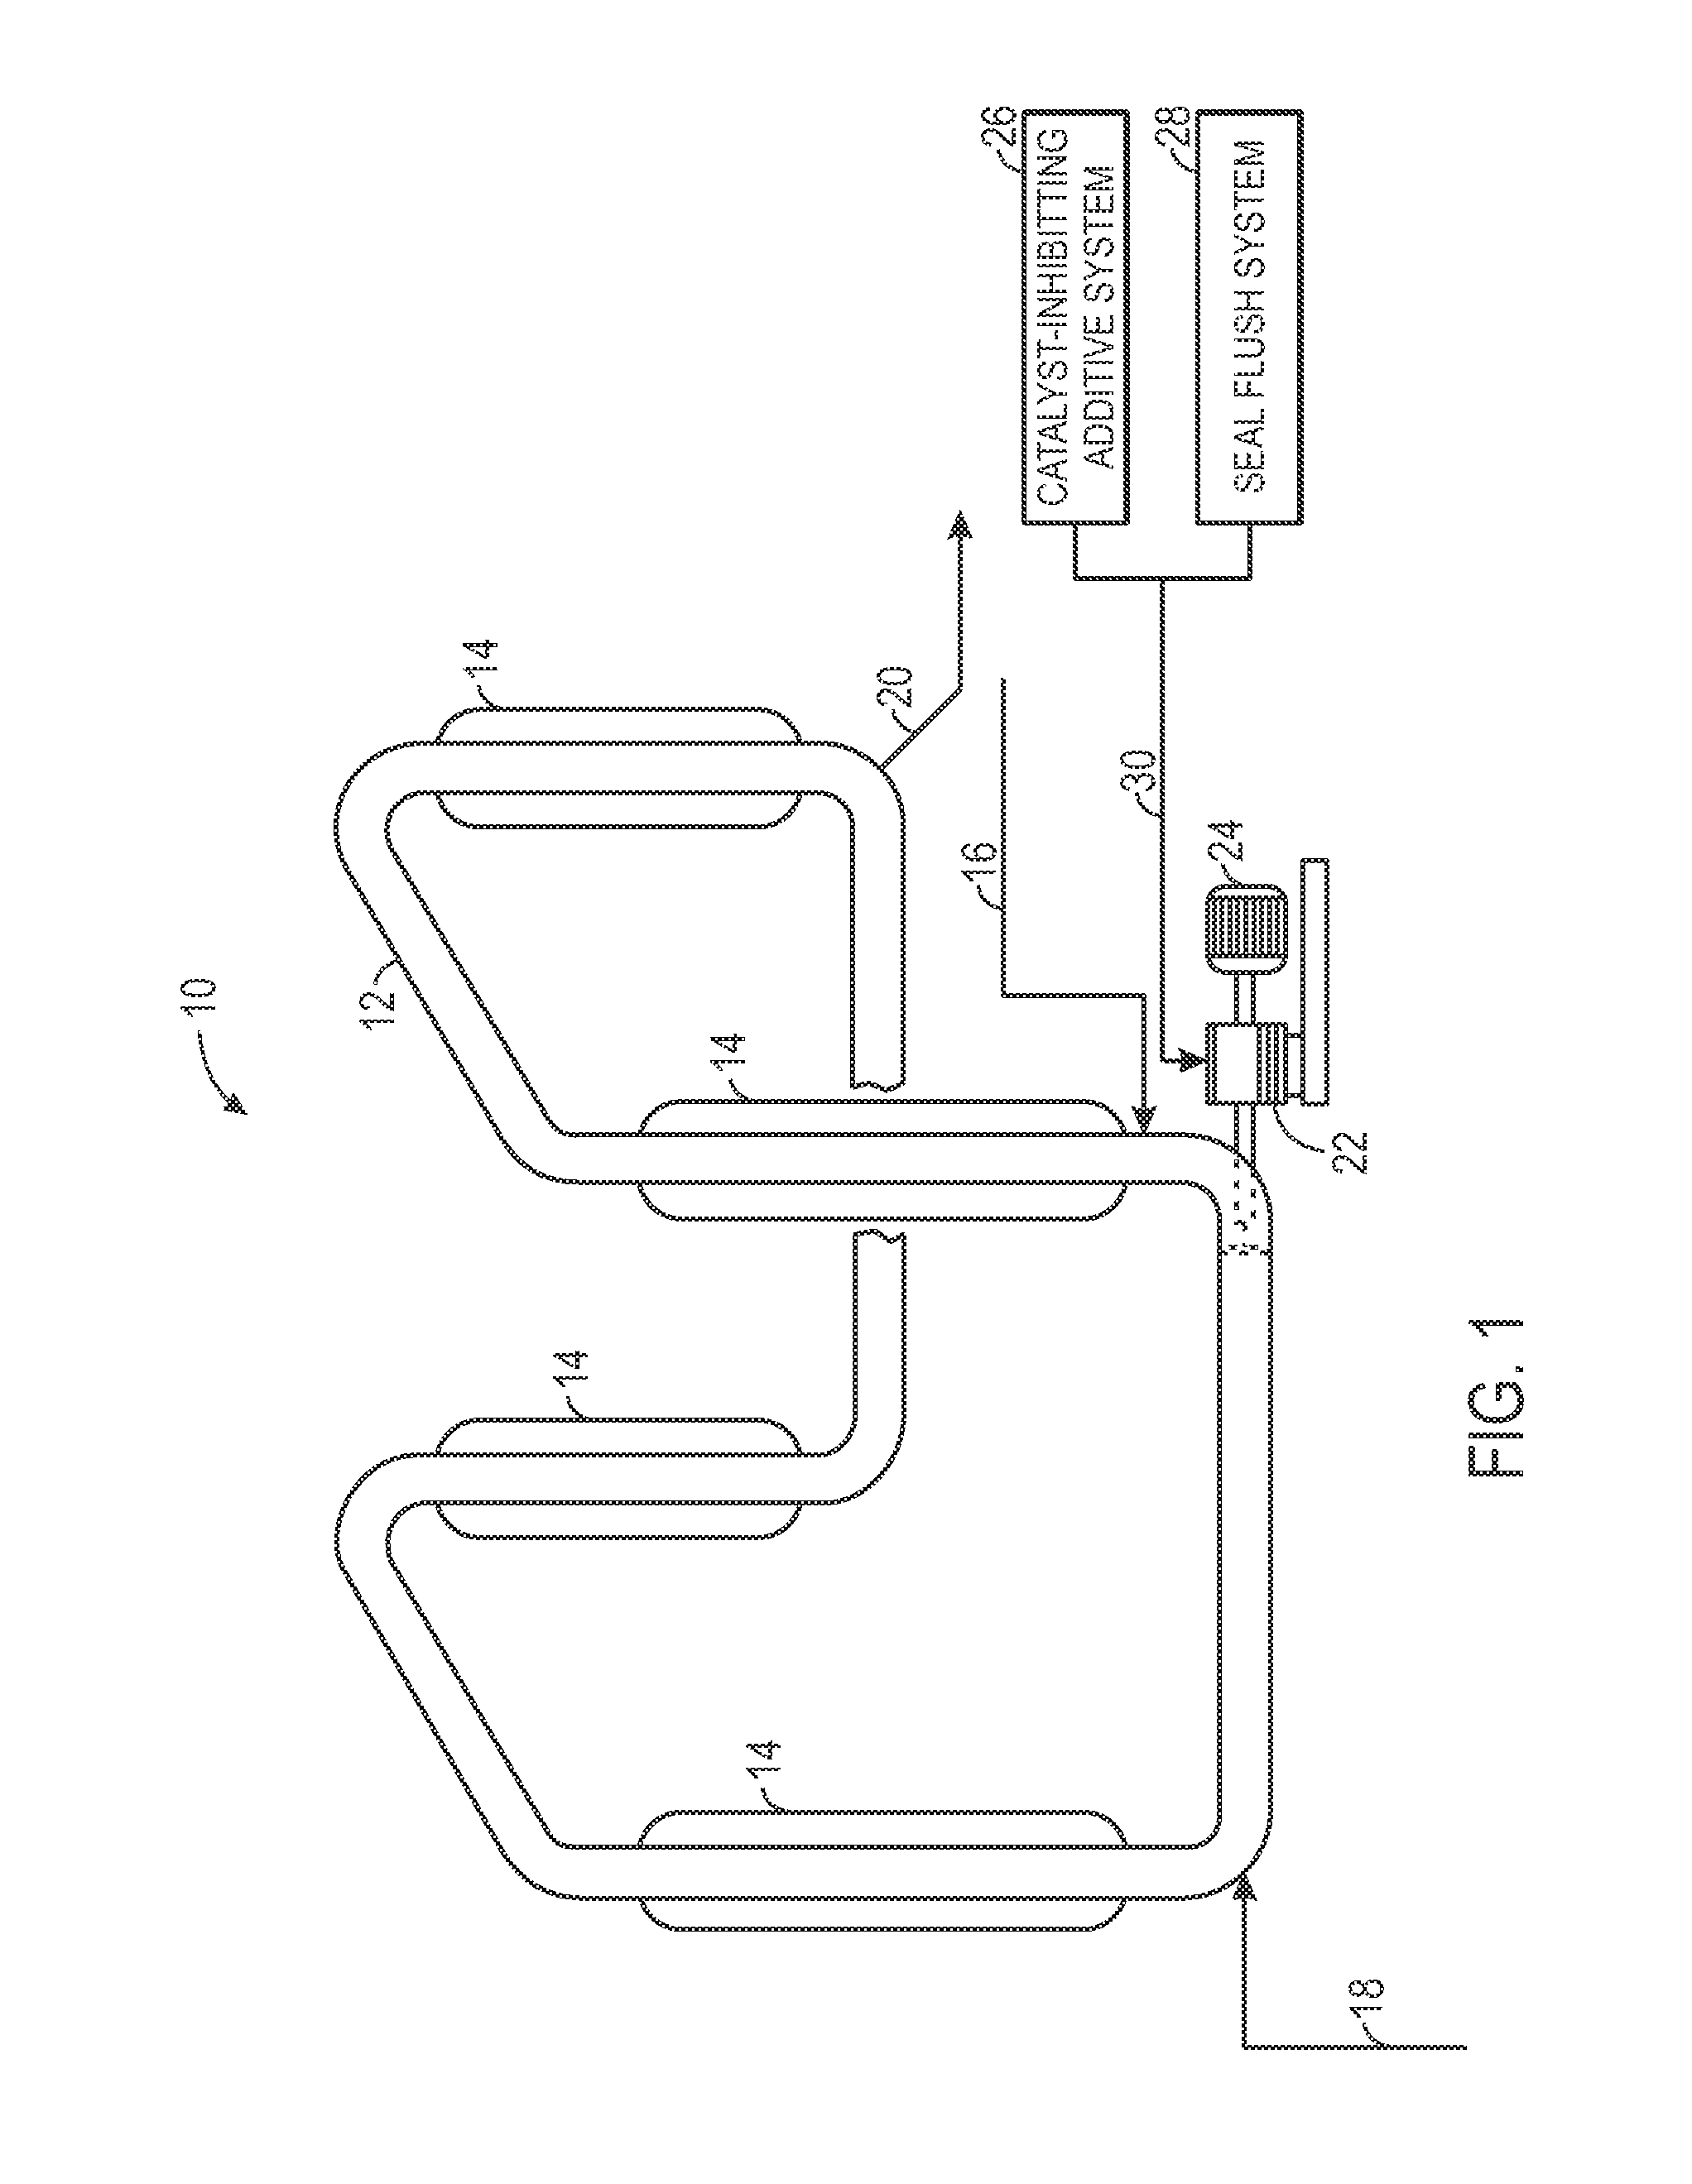 System and method for seal flush